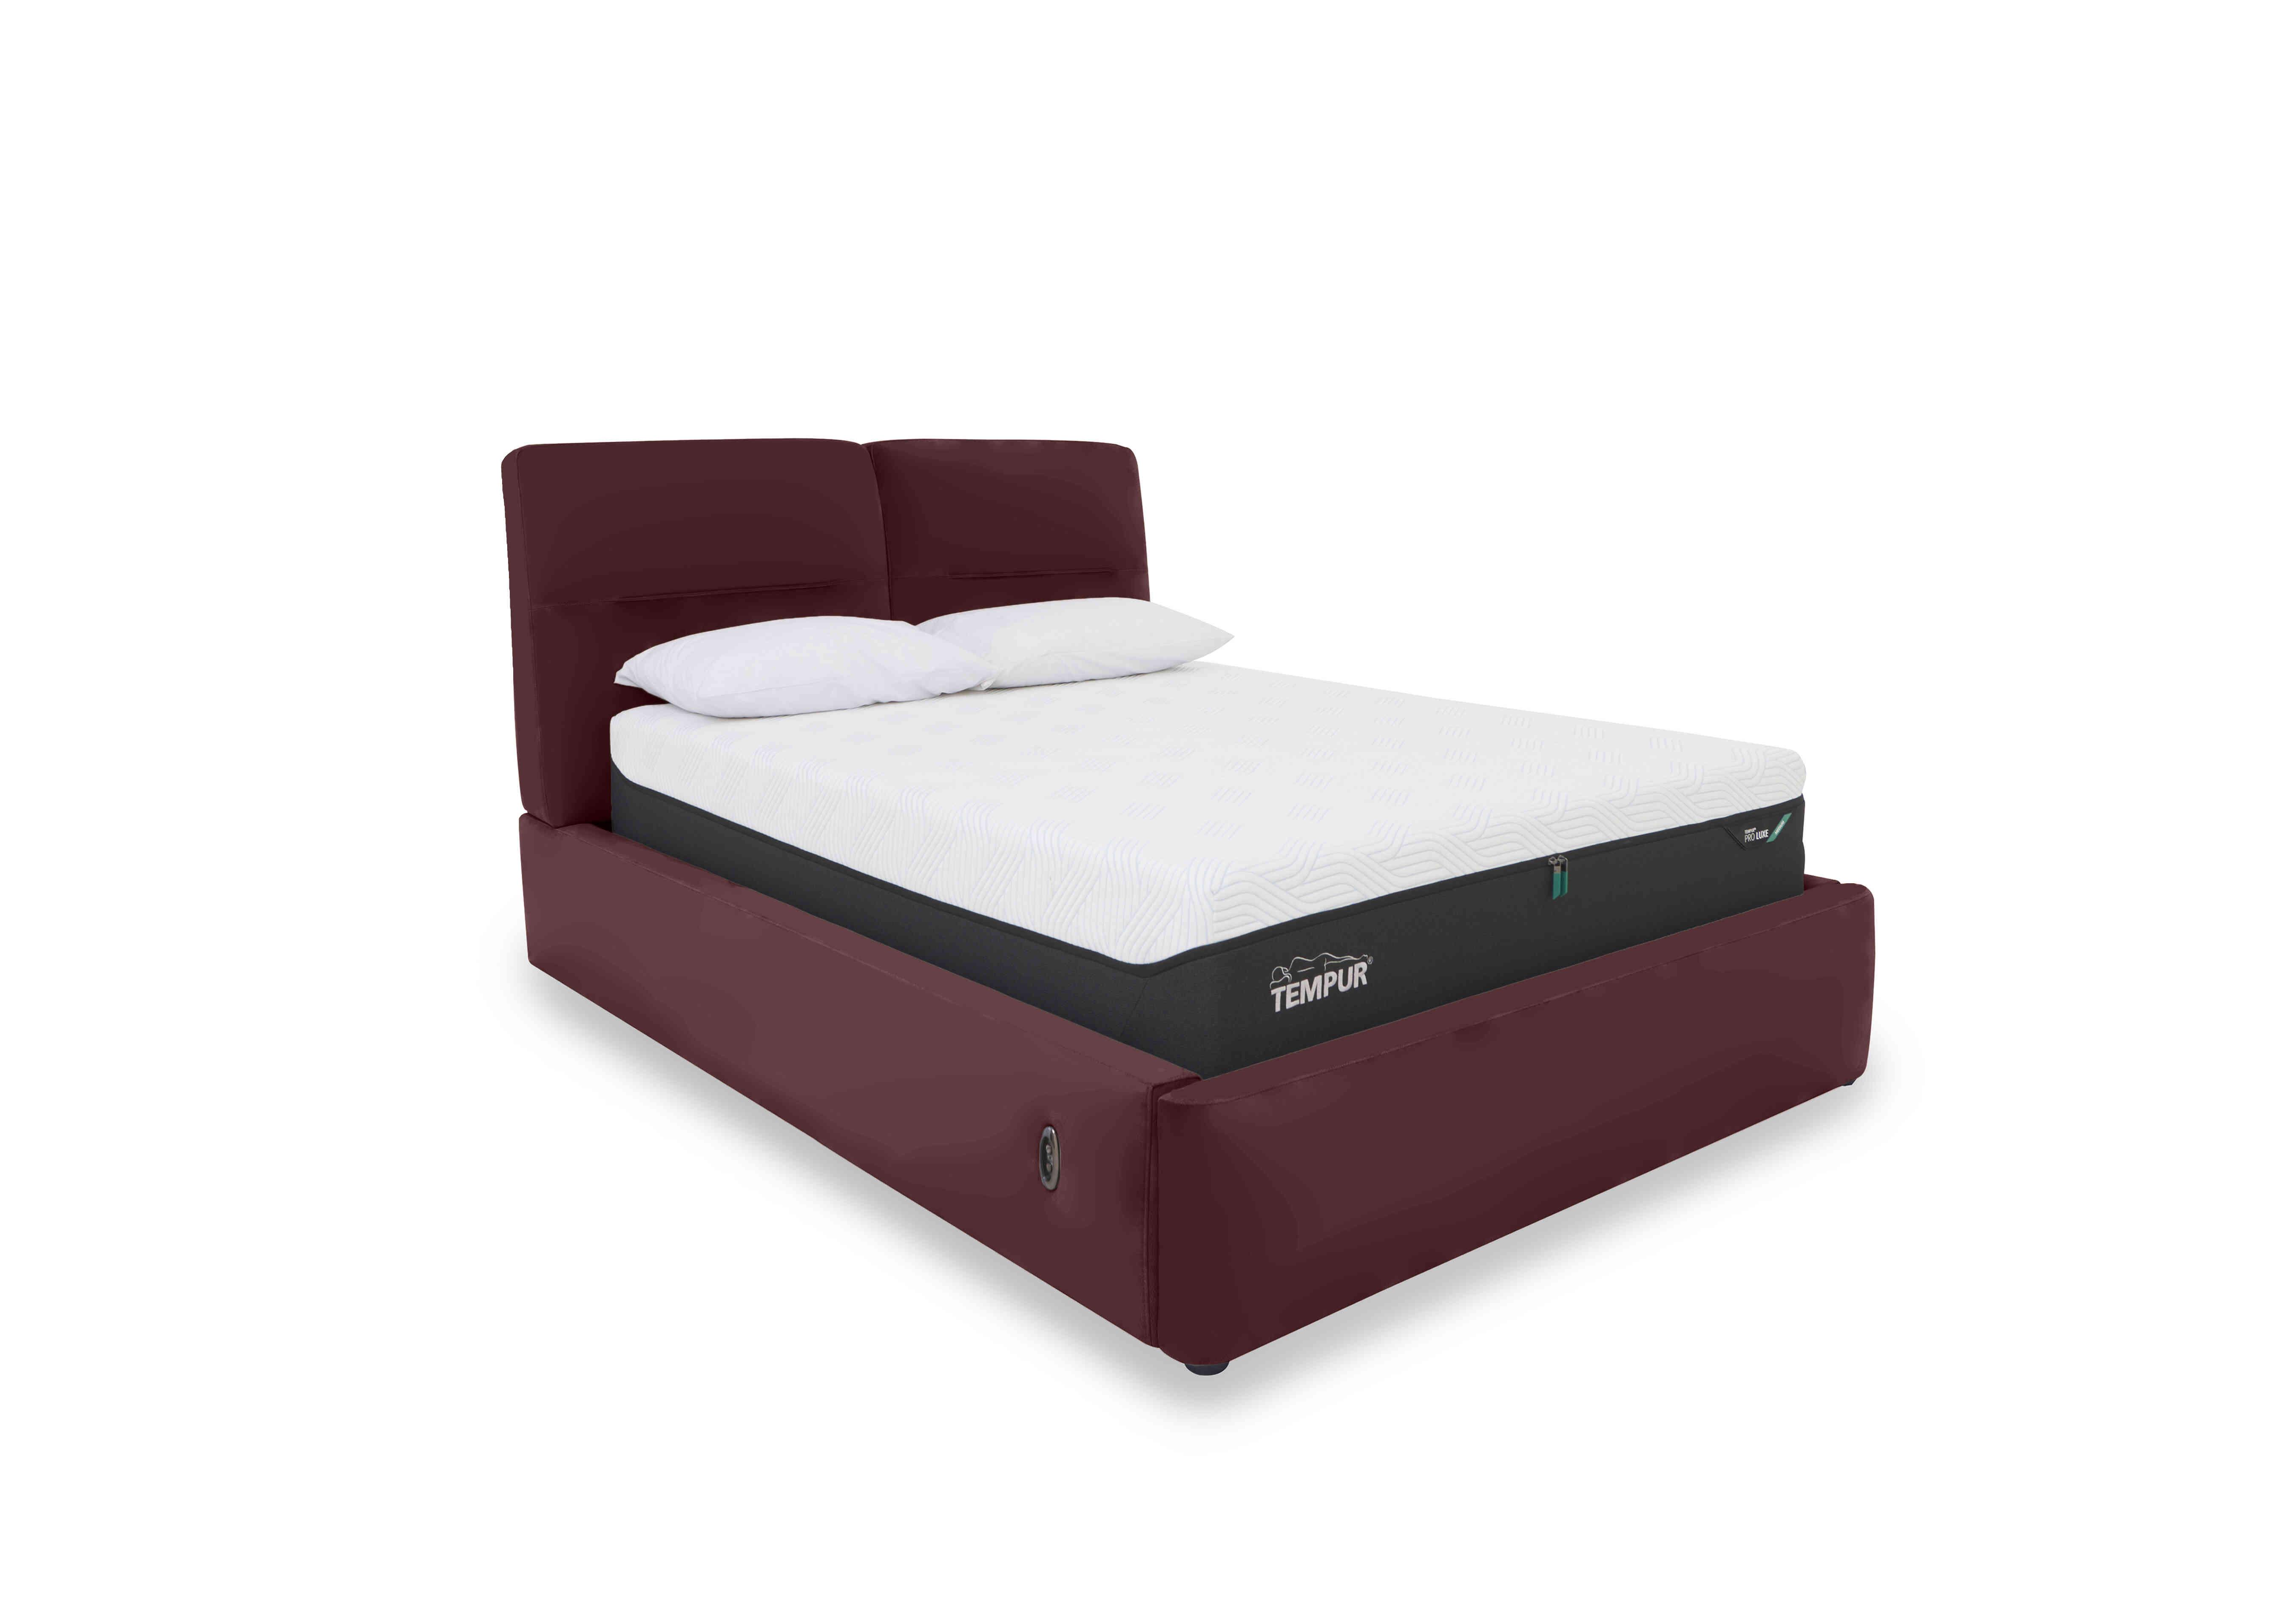 Stark Leather Electric Ottoman Bed Frame in Bv-035c Deep Red on Furniture Village